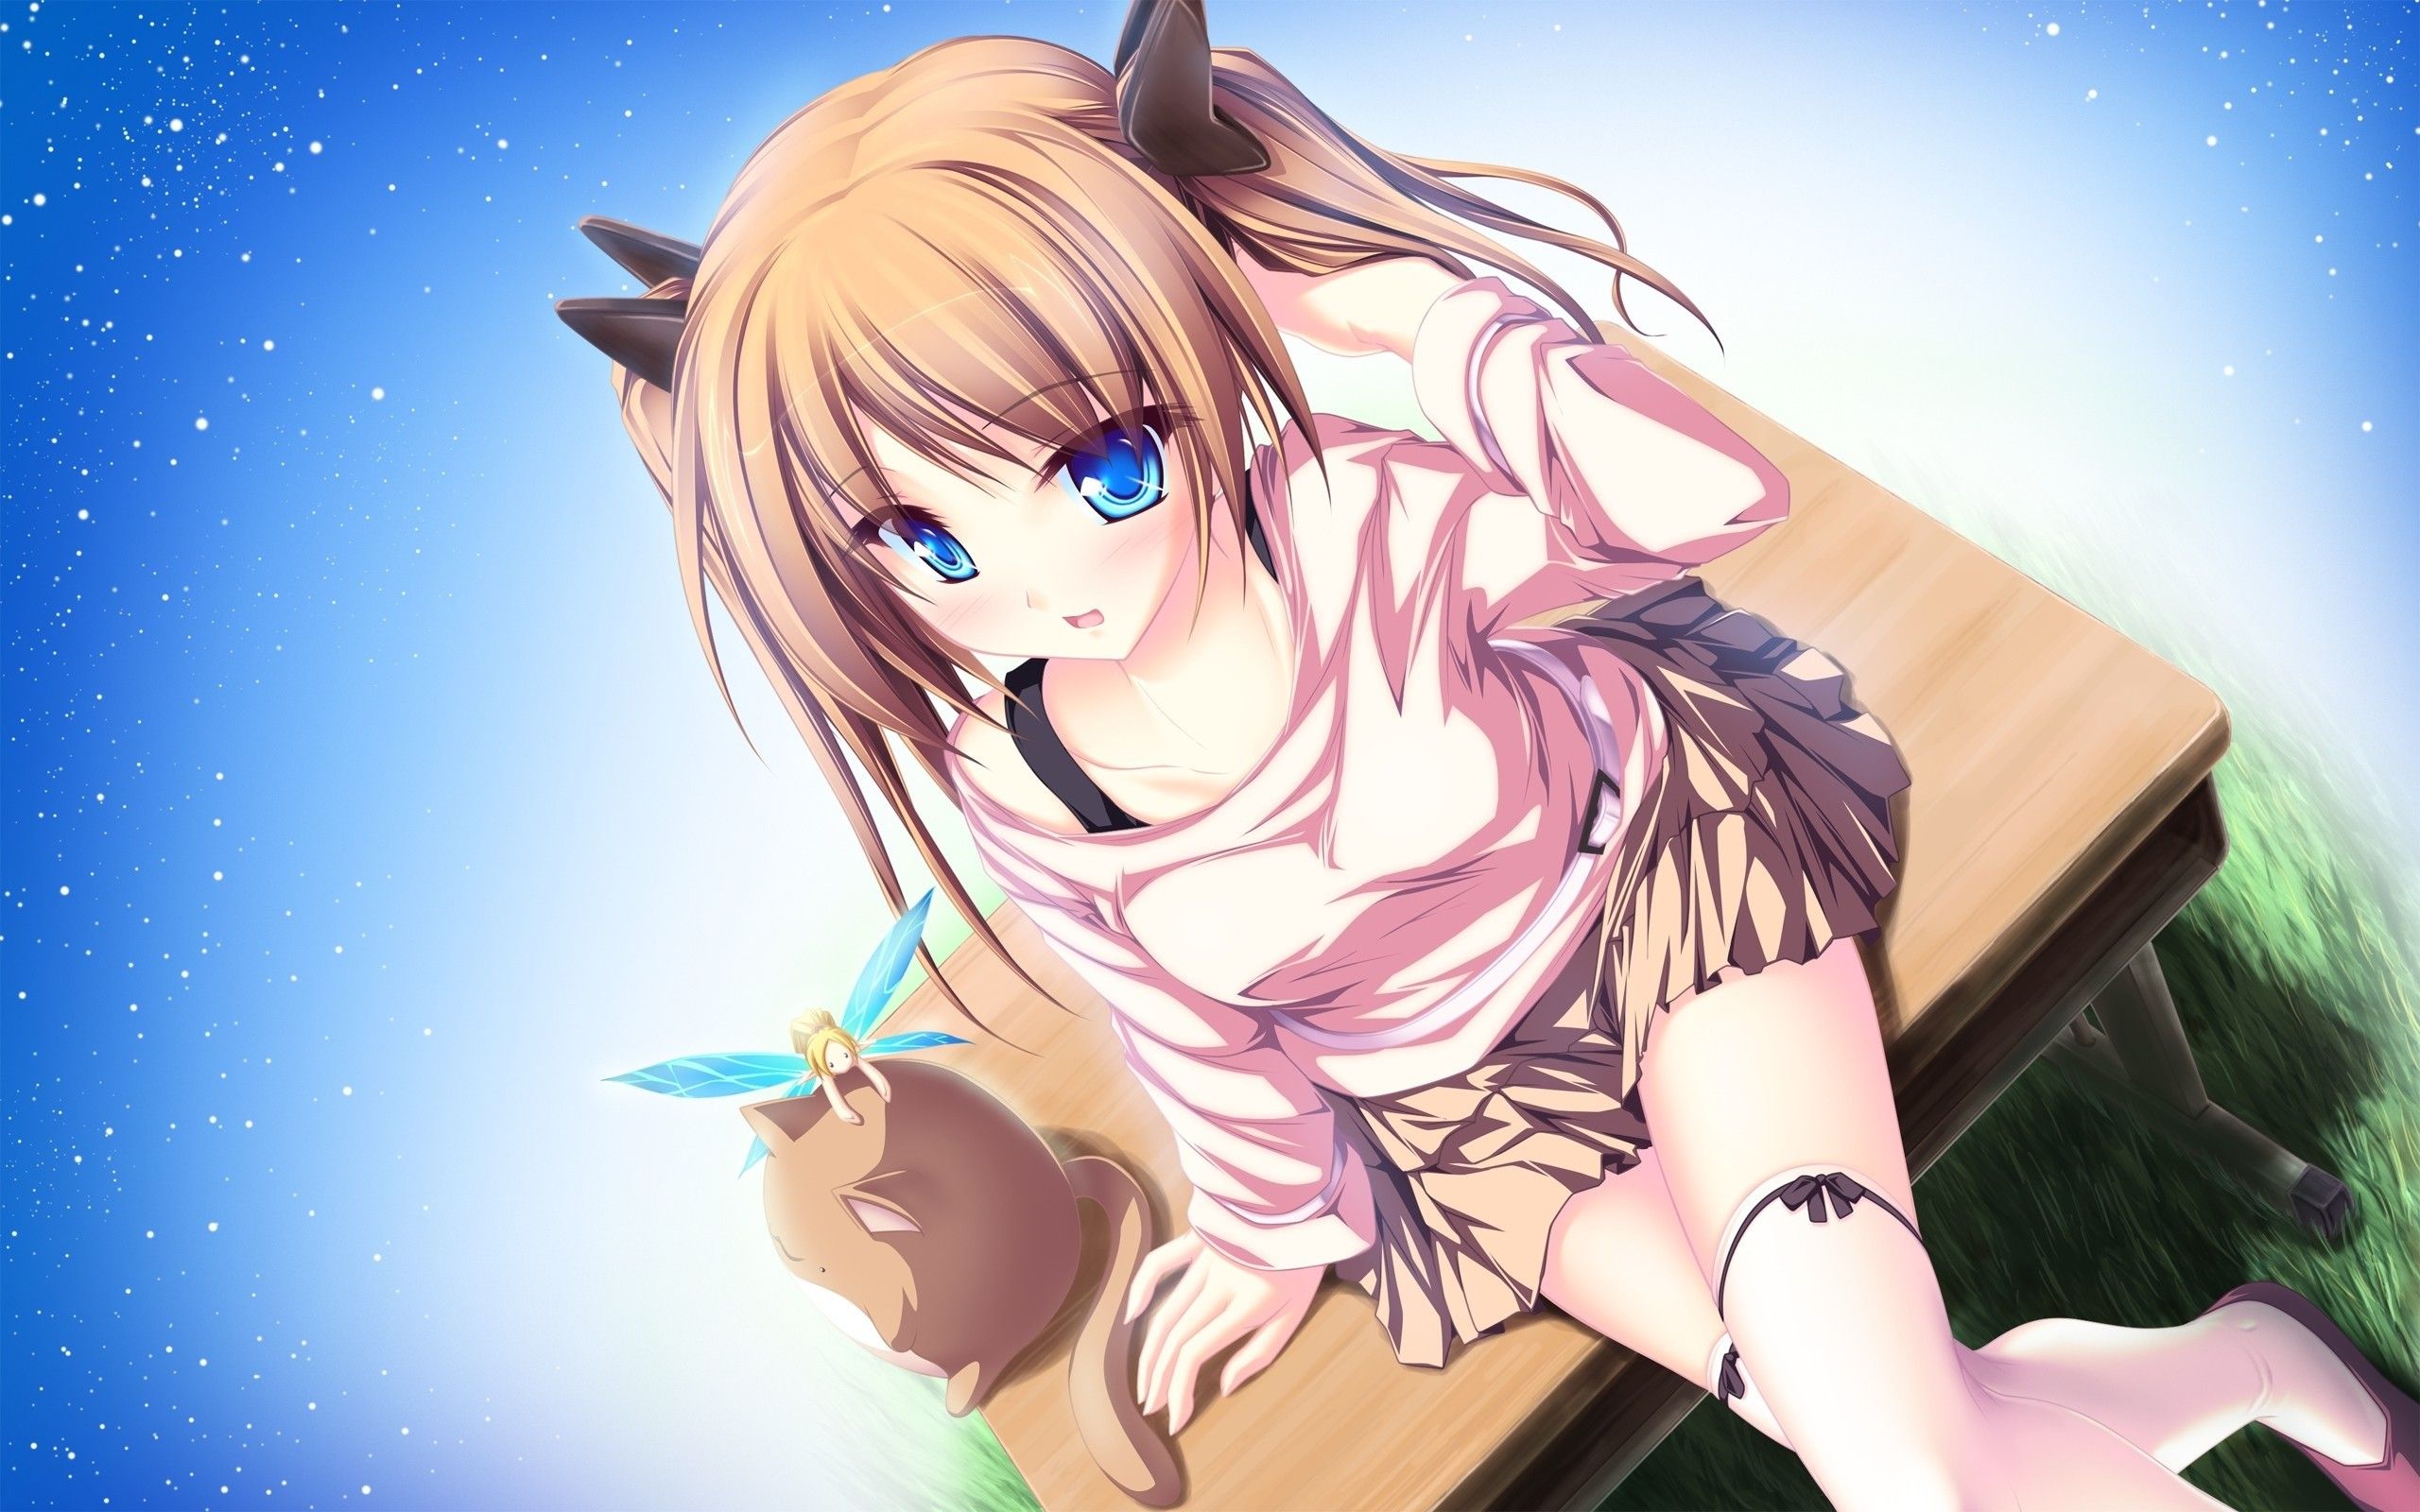 Super Cute Anime Girl Wallpapers - Wallpaper Cave